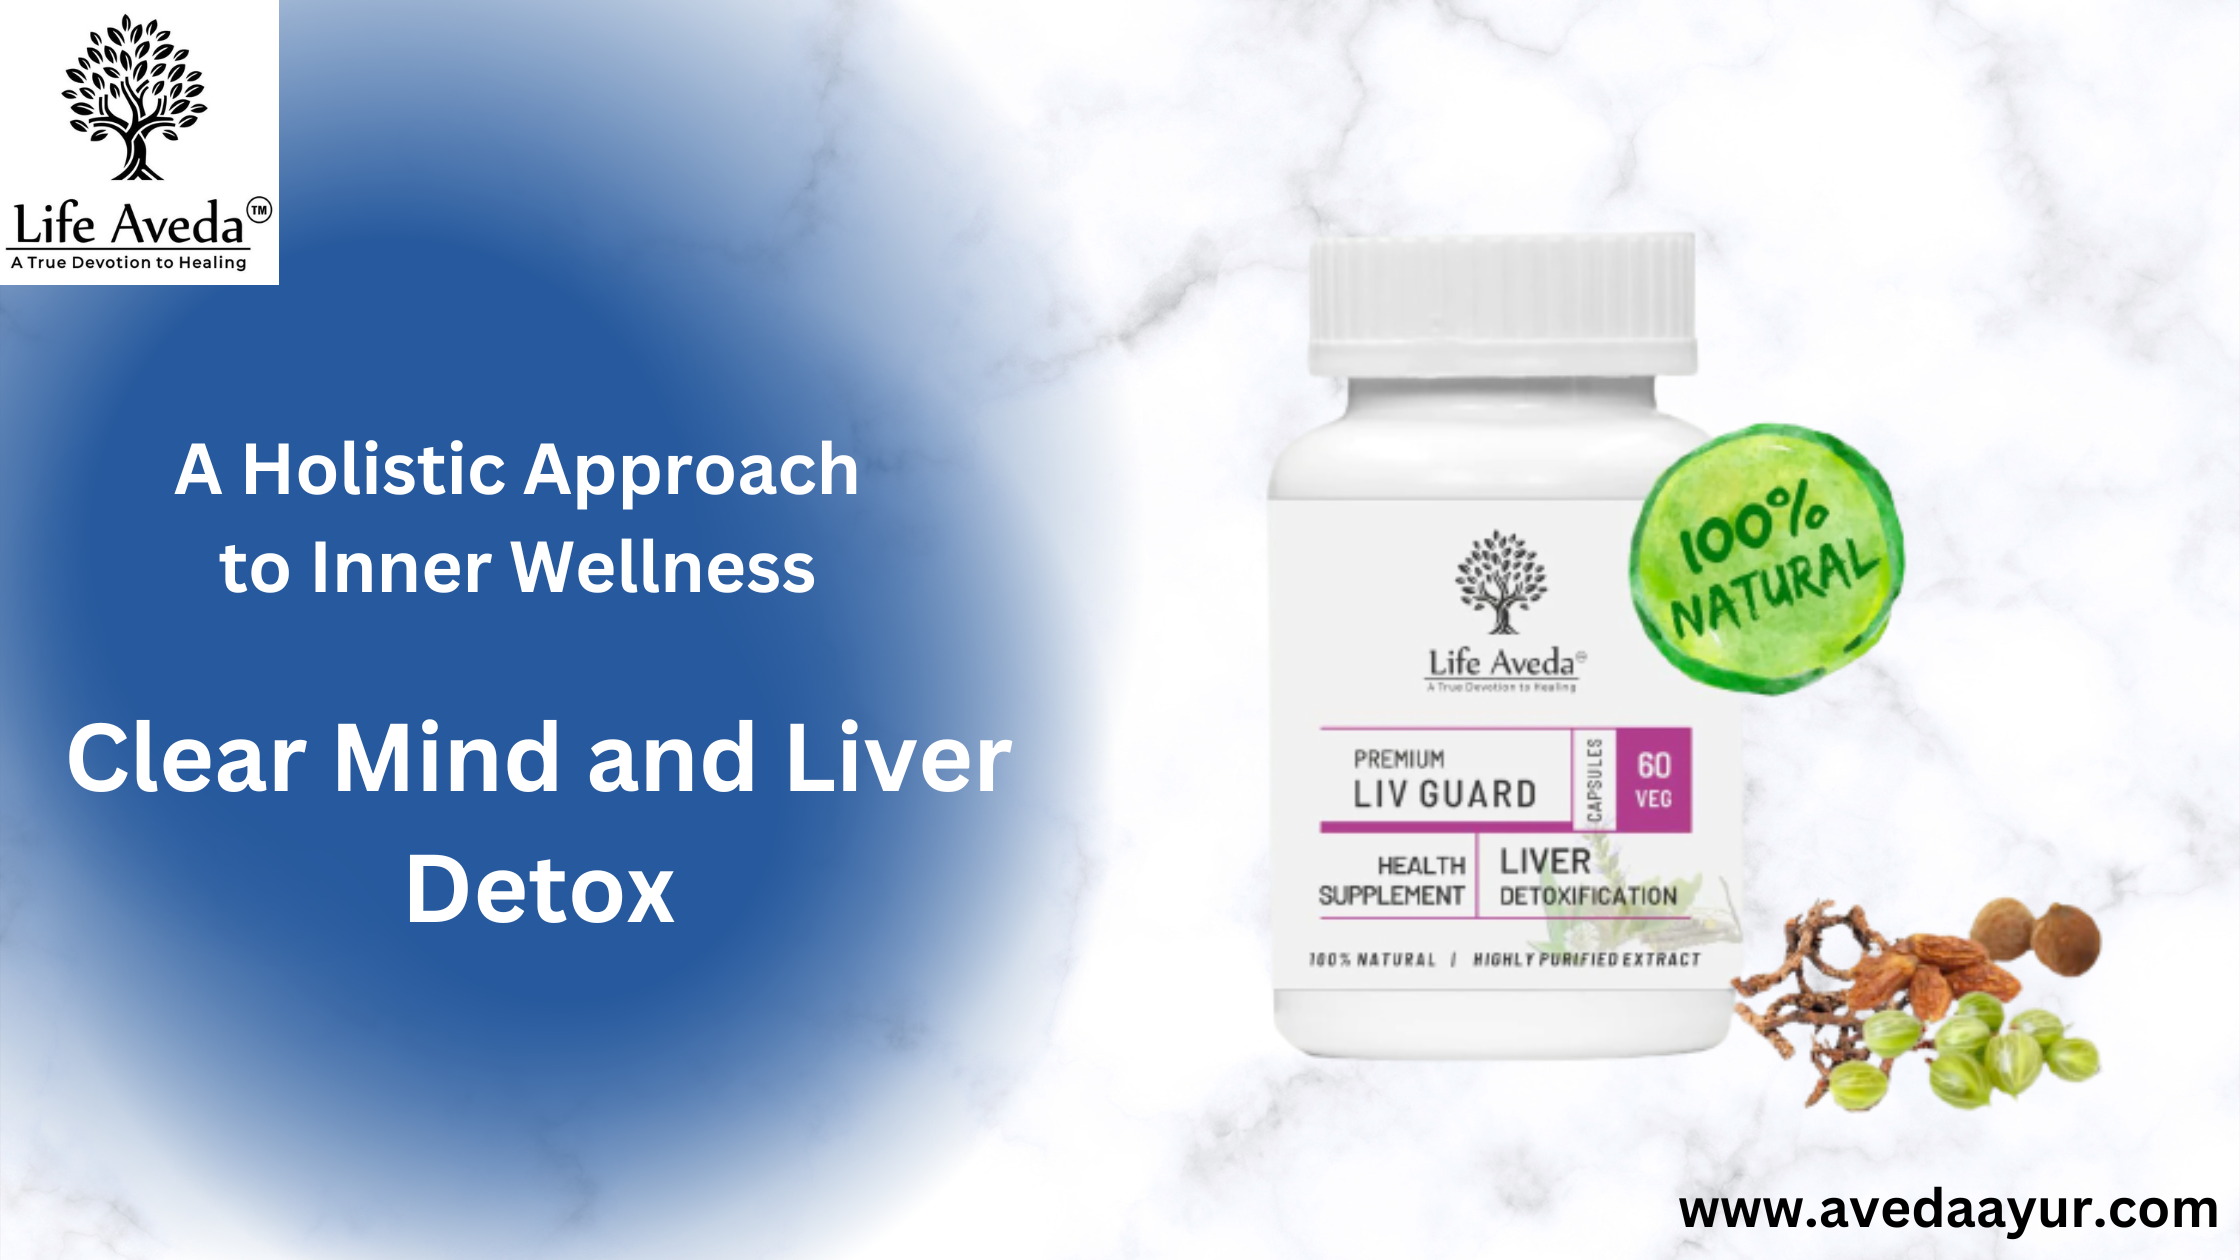 Clear Mind and Liver Detox: A Holistic Approach to Inner Wellness